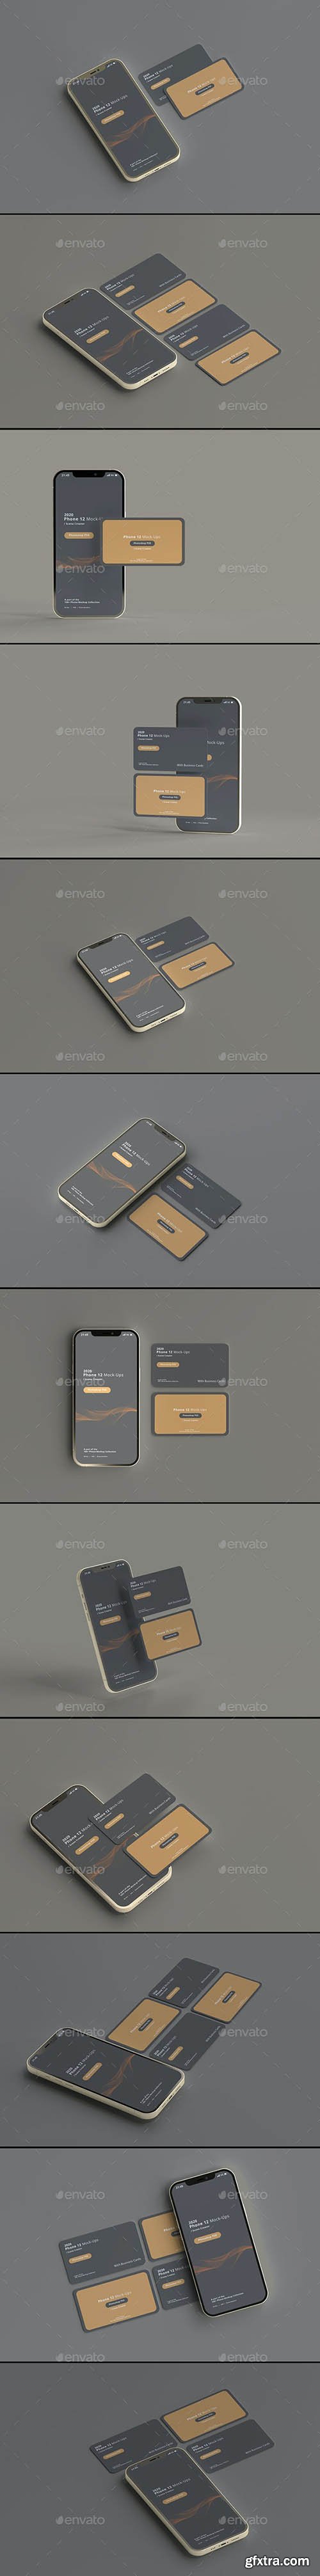 GraphicRiver - 2020 Smart Phone 12 Mockups with Business Cards 29123334